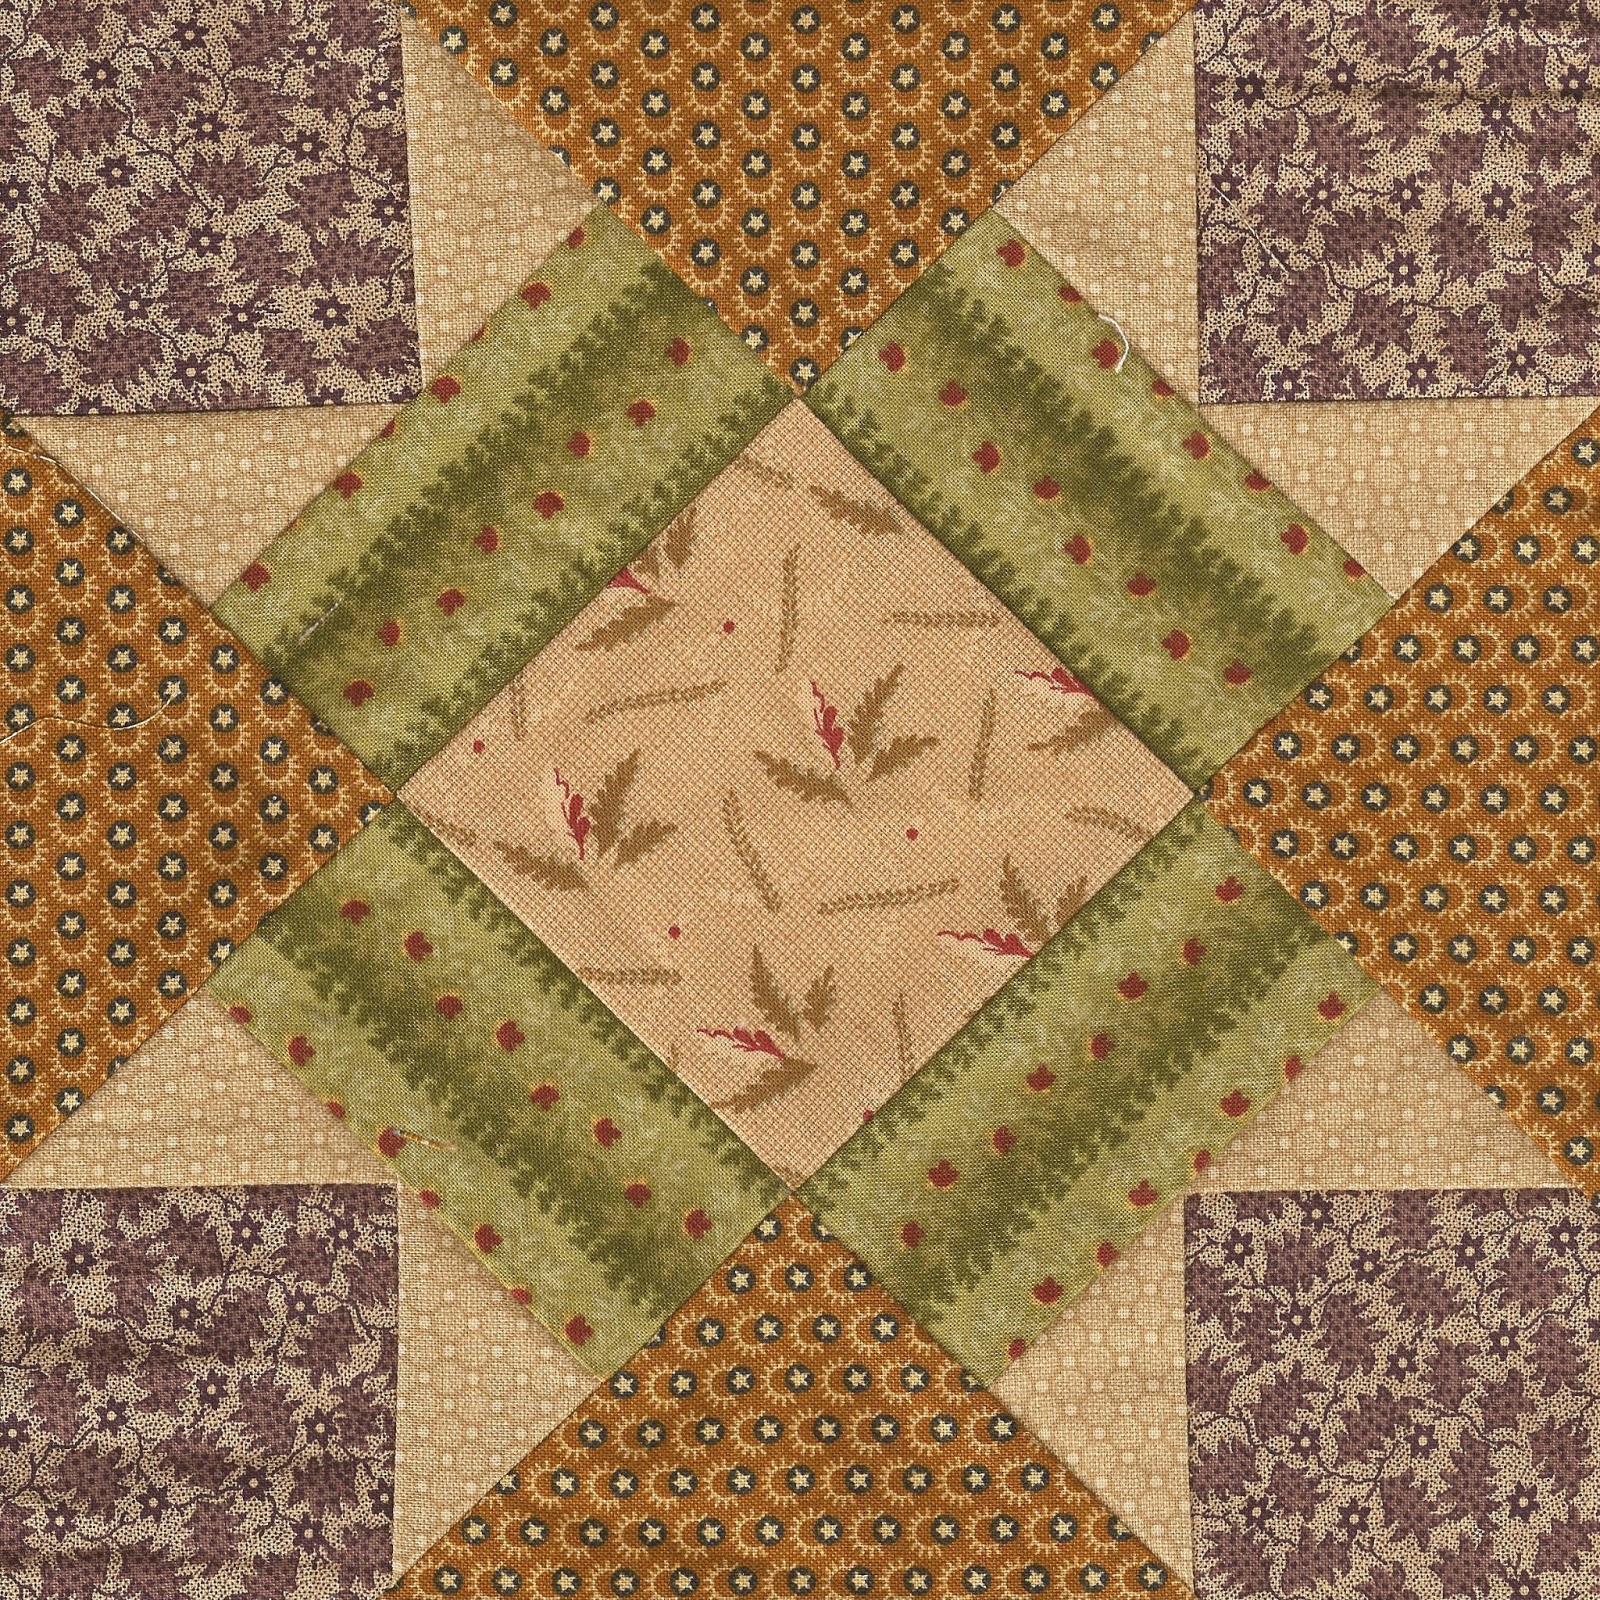 M.S. Dolittle Quilter: Grandmothers' Choice BOW by Barbara Brackman